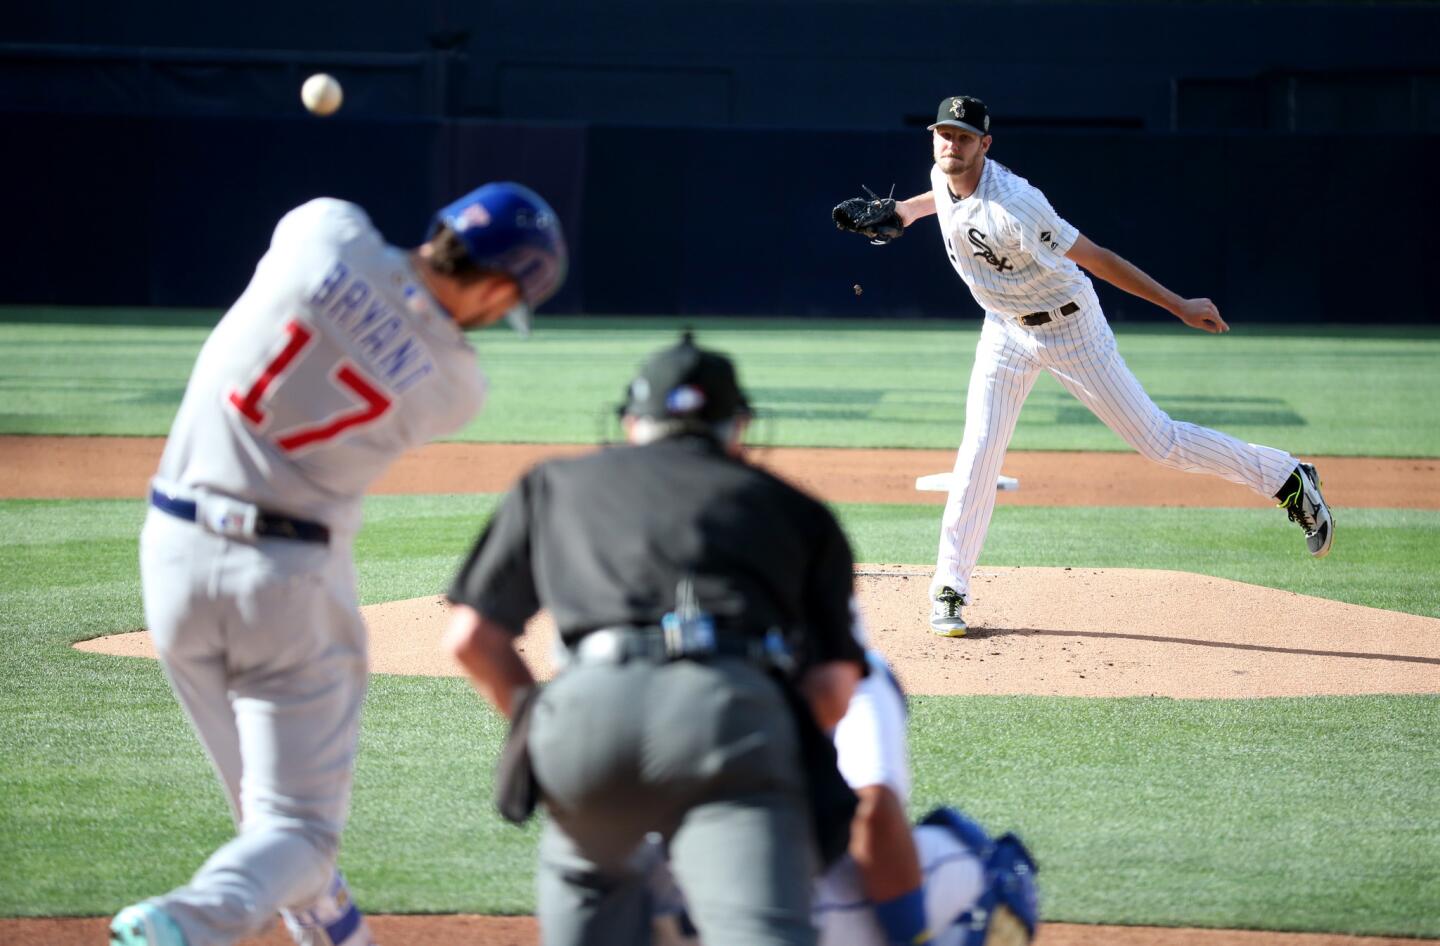 July 12, 2016: The only pitch Cubs third baseman Kris Bryant saw from White Sox left-hander Chris Sale was 96 mph and landed 410 feet away from home plate at Petco Park in San Diego, the same city in which Bryant was a college player just two years earlier. Bryant had struck out all six times he batted against Sale before facing him in the first inning that night.